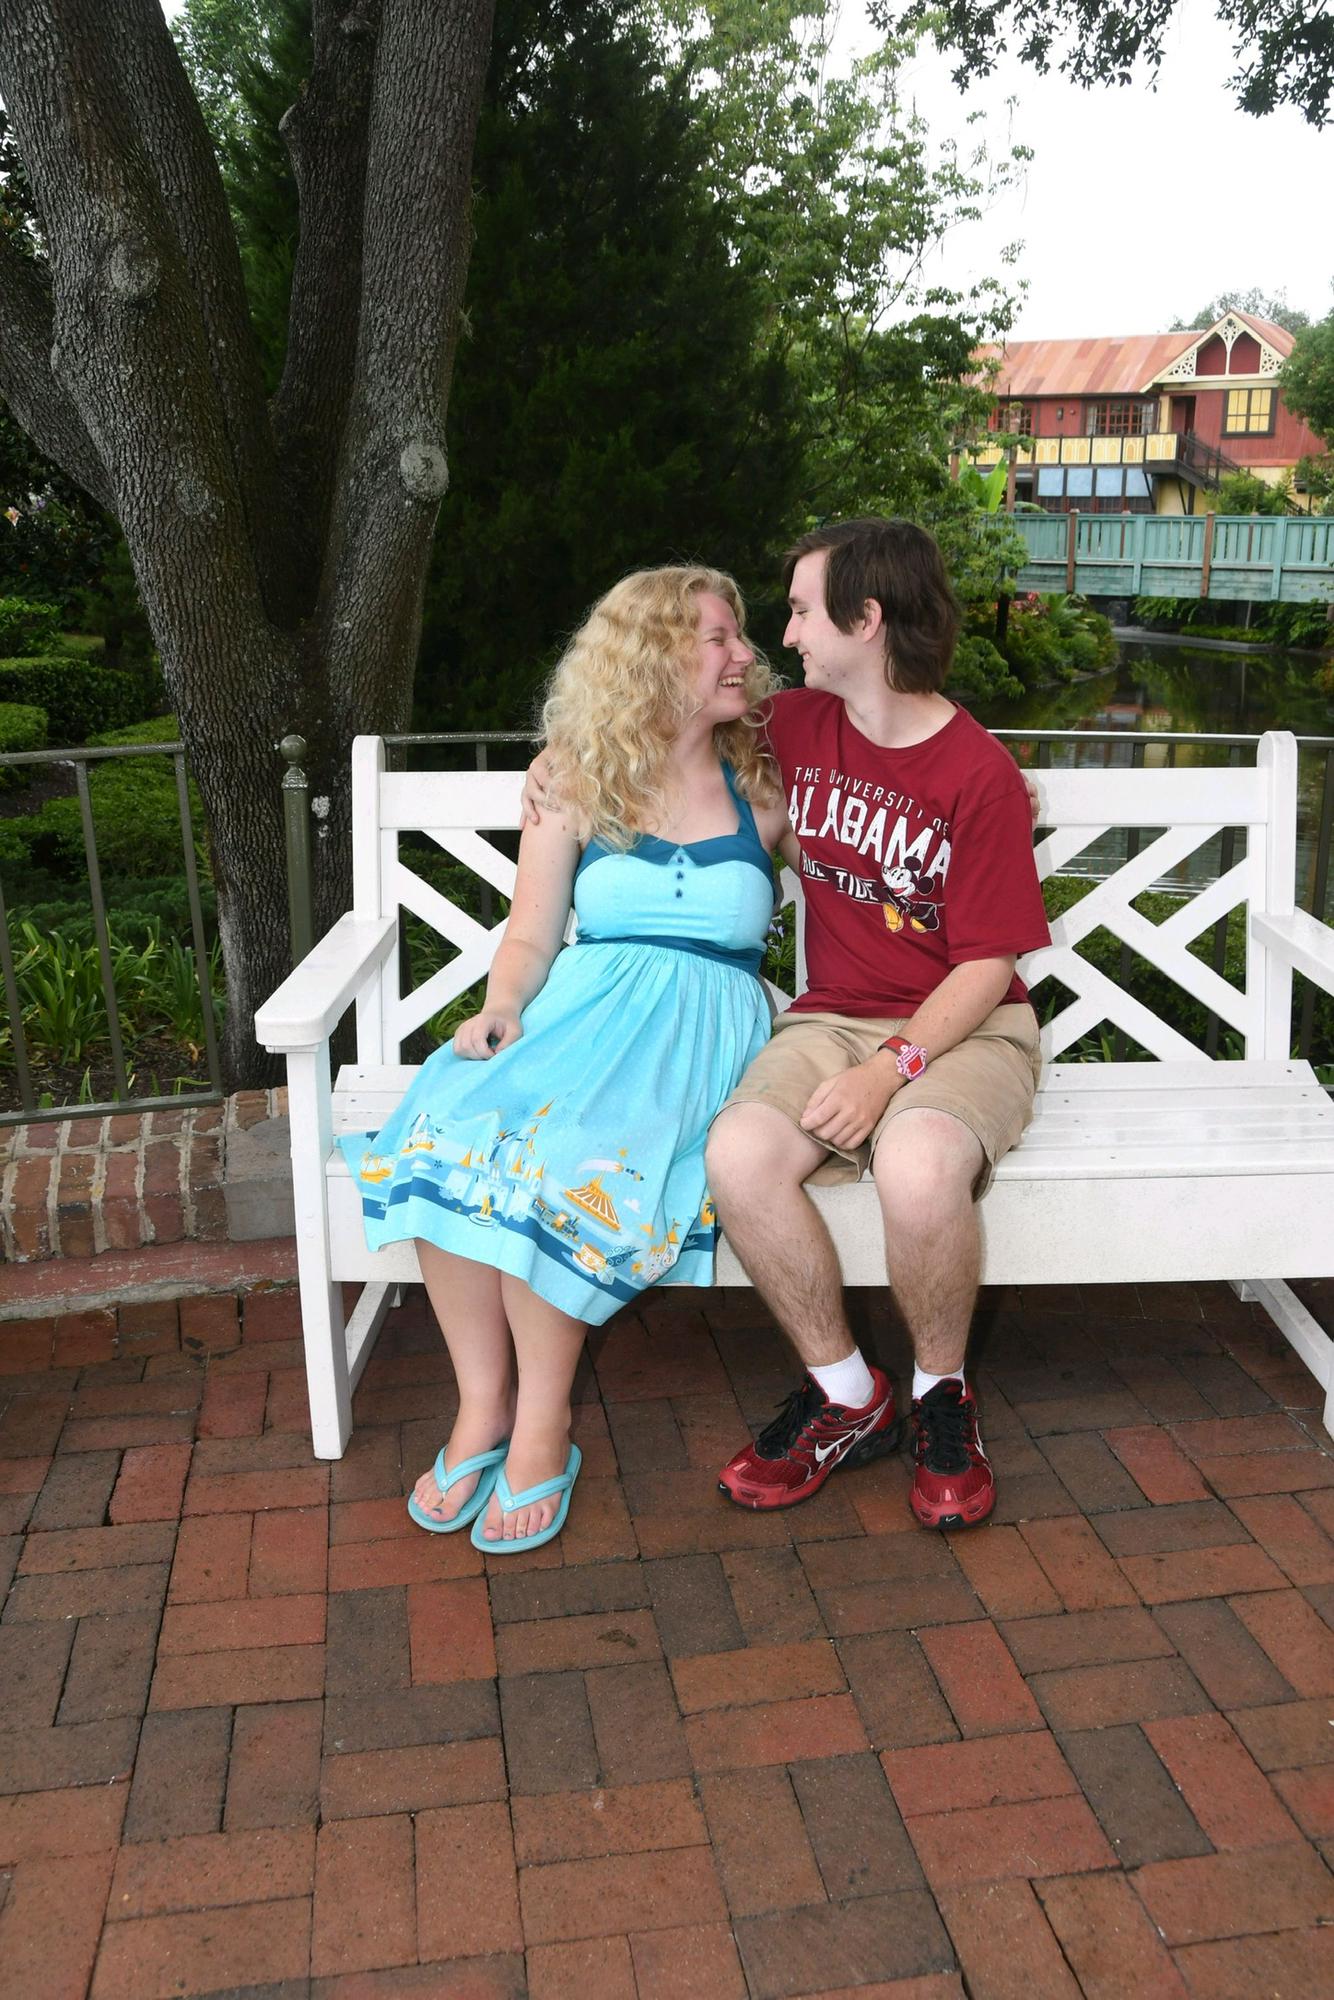 So many cute pictures taken by a wonderful Photopass cast member at Magic Kingdom